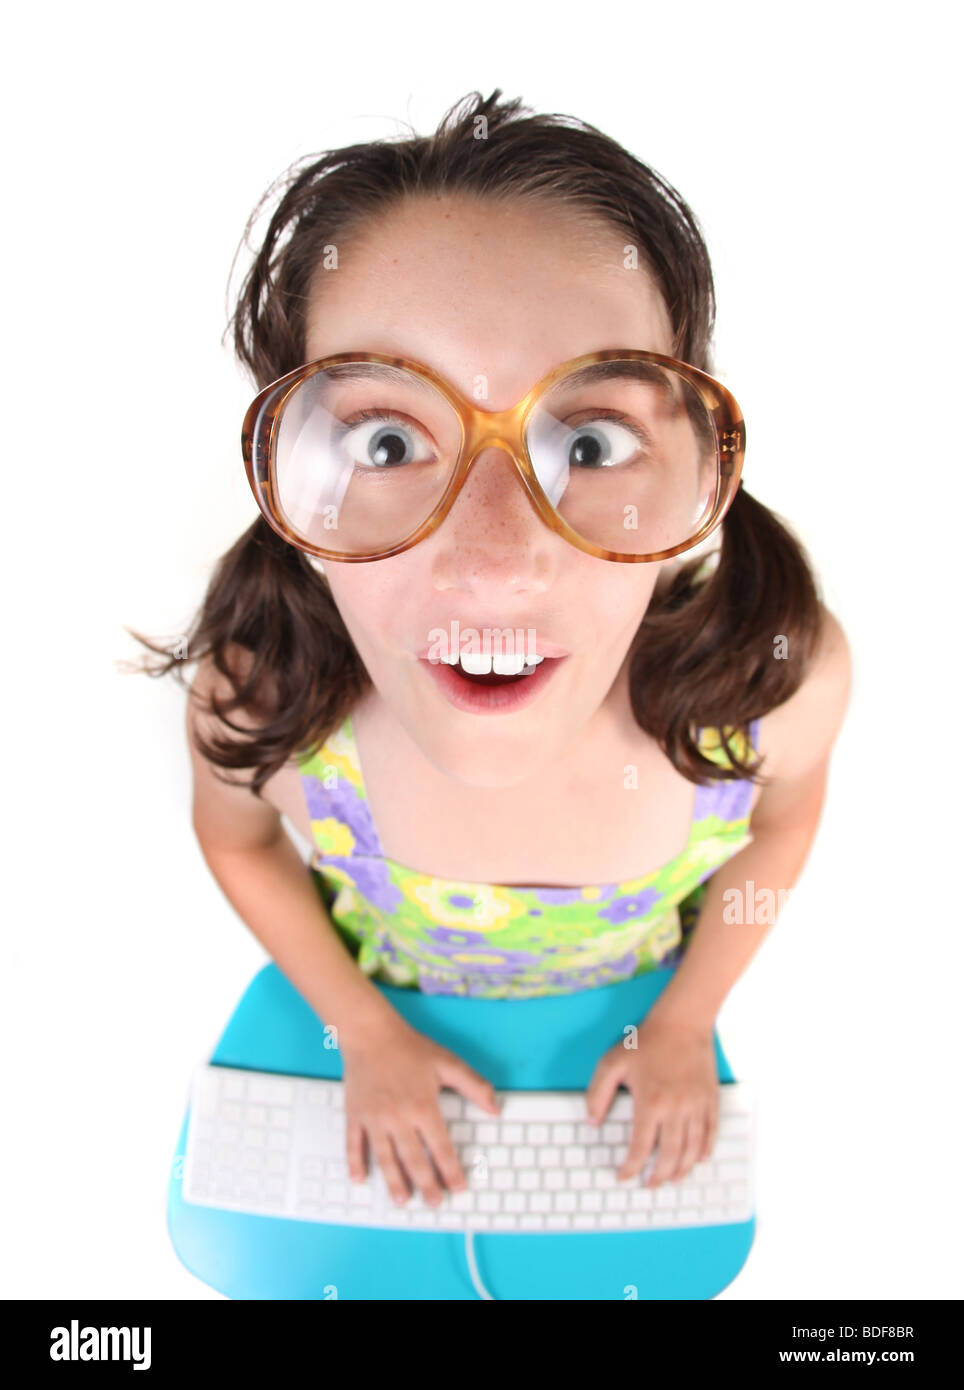 Funny Young Child Working on a Computer Keyboard Looking Up. Fisheye Lens Effect. Stock Photo